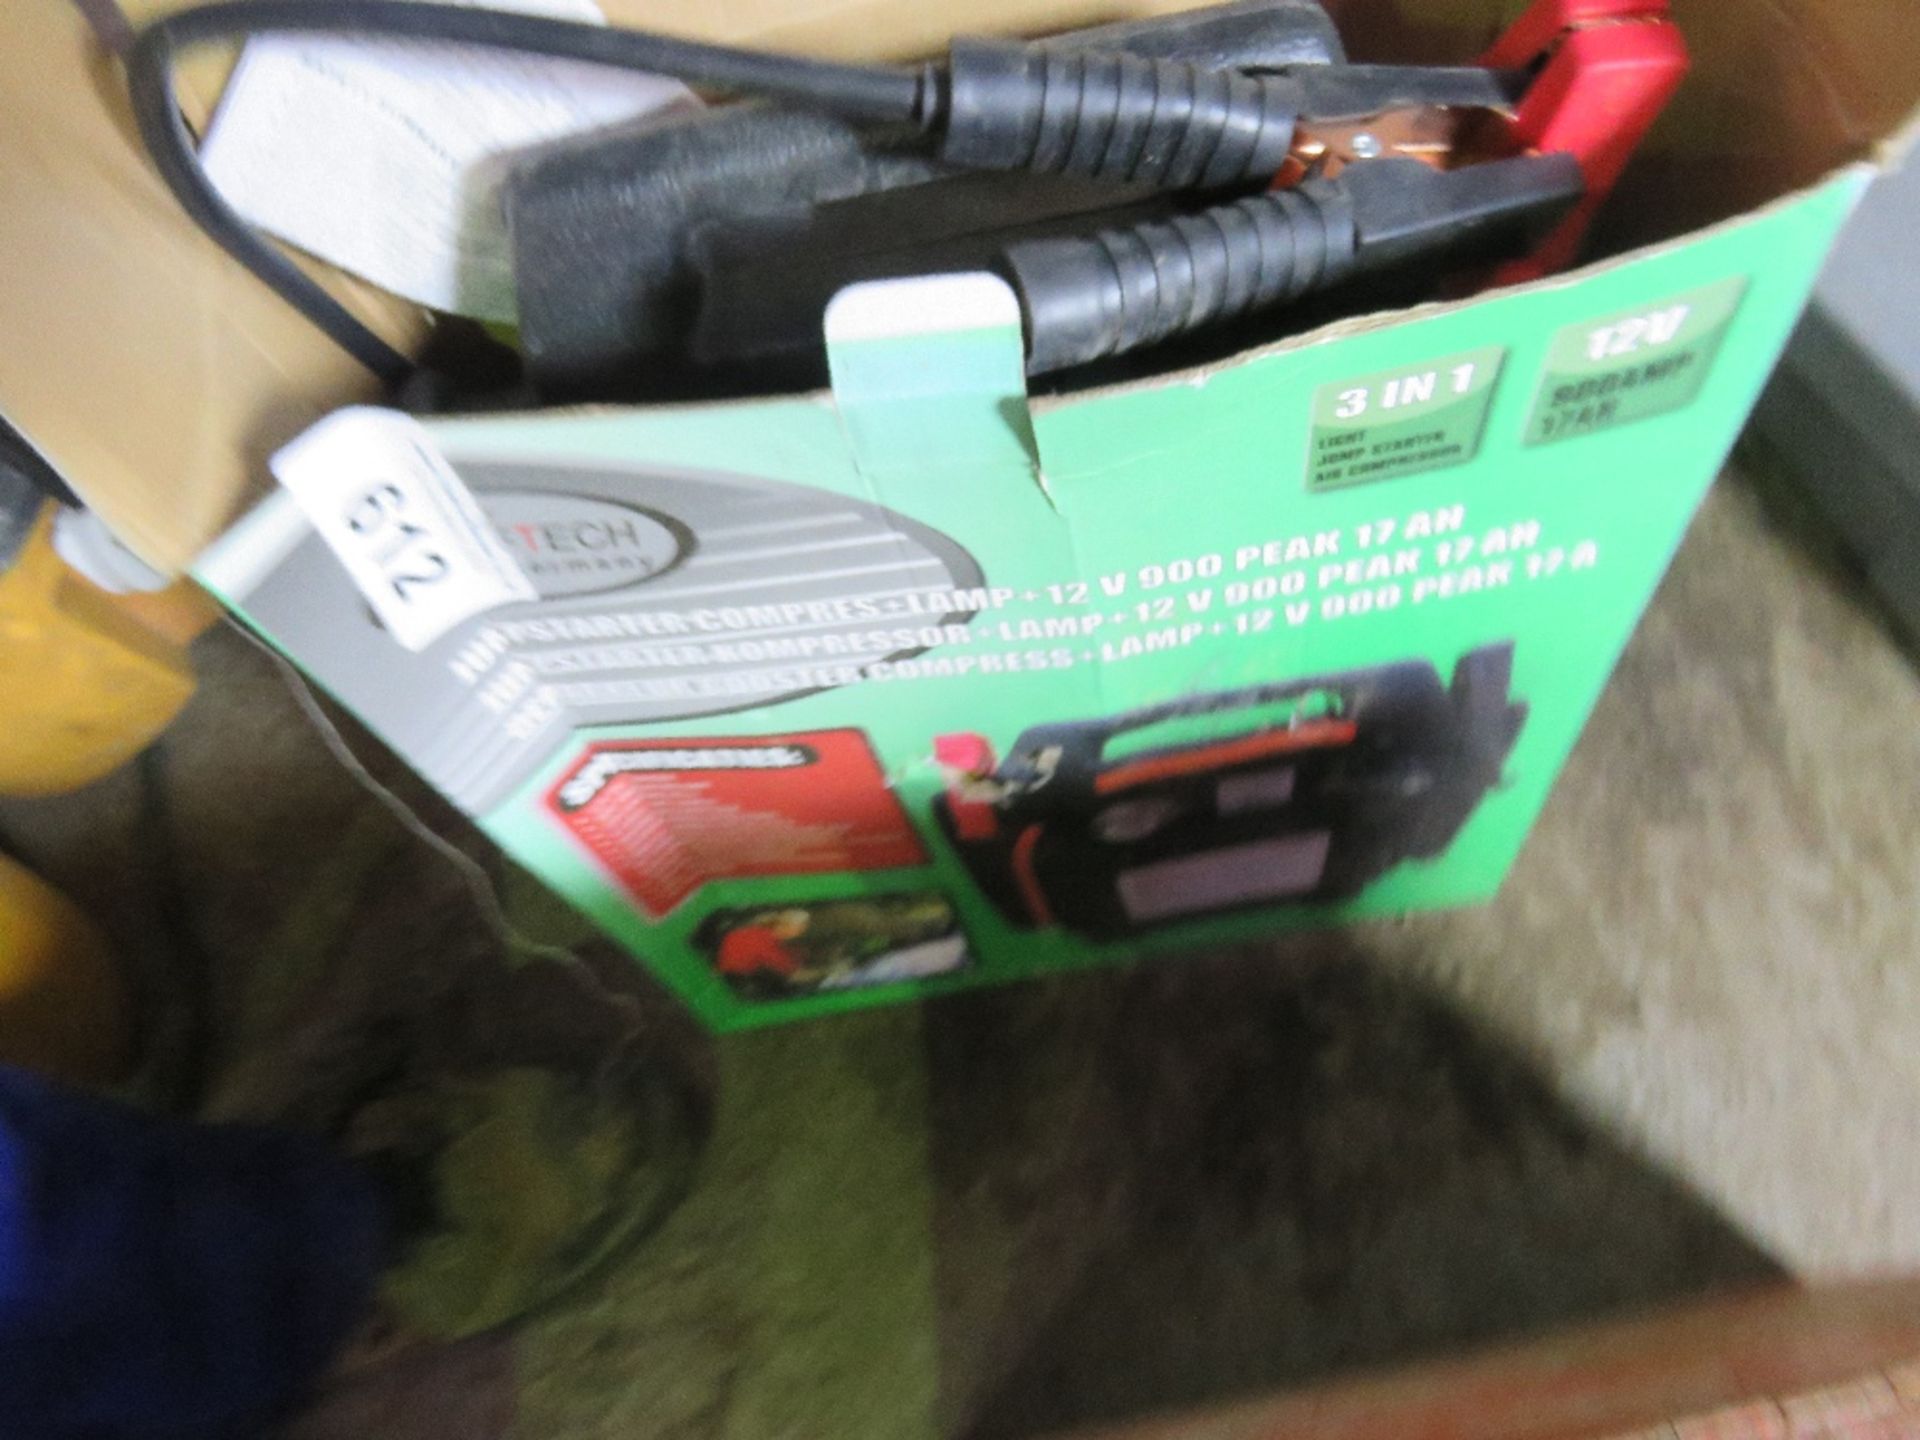 2 X JUMP STARTER UNITS IN BOXES.